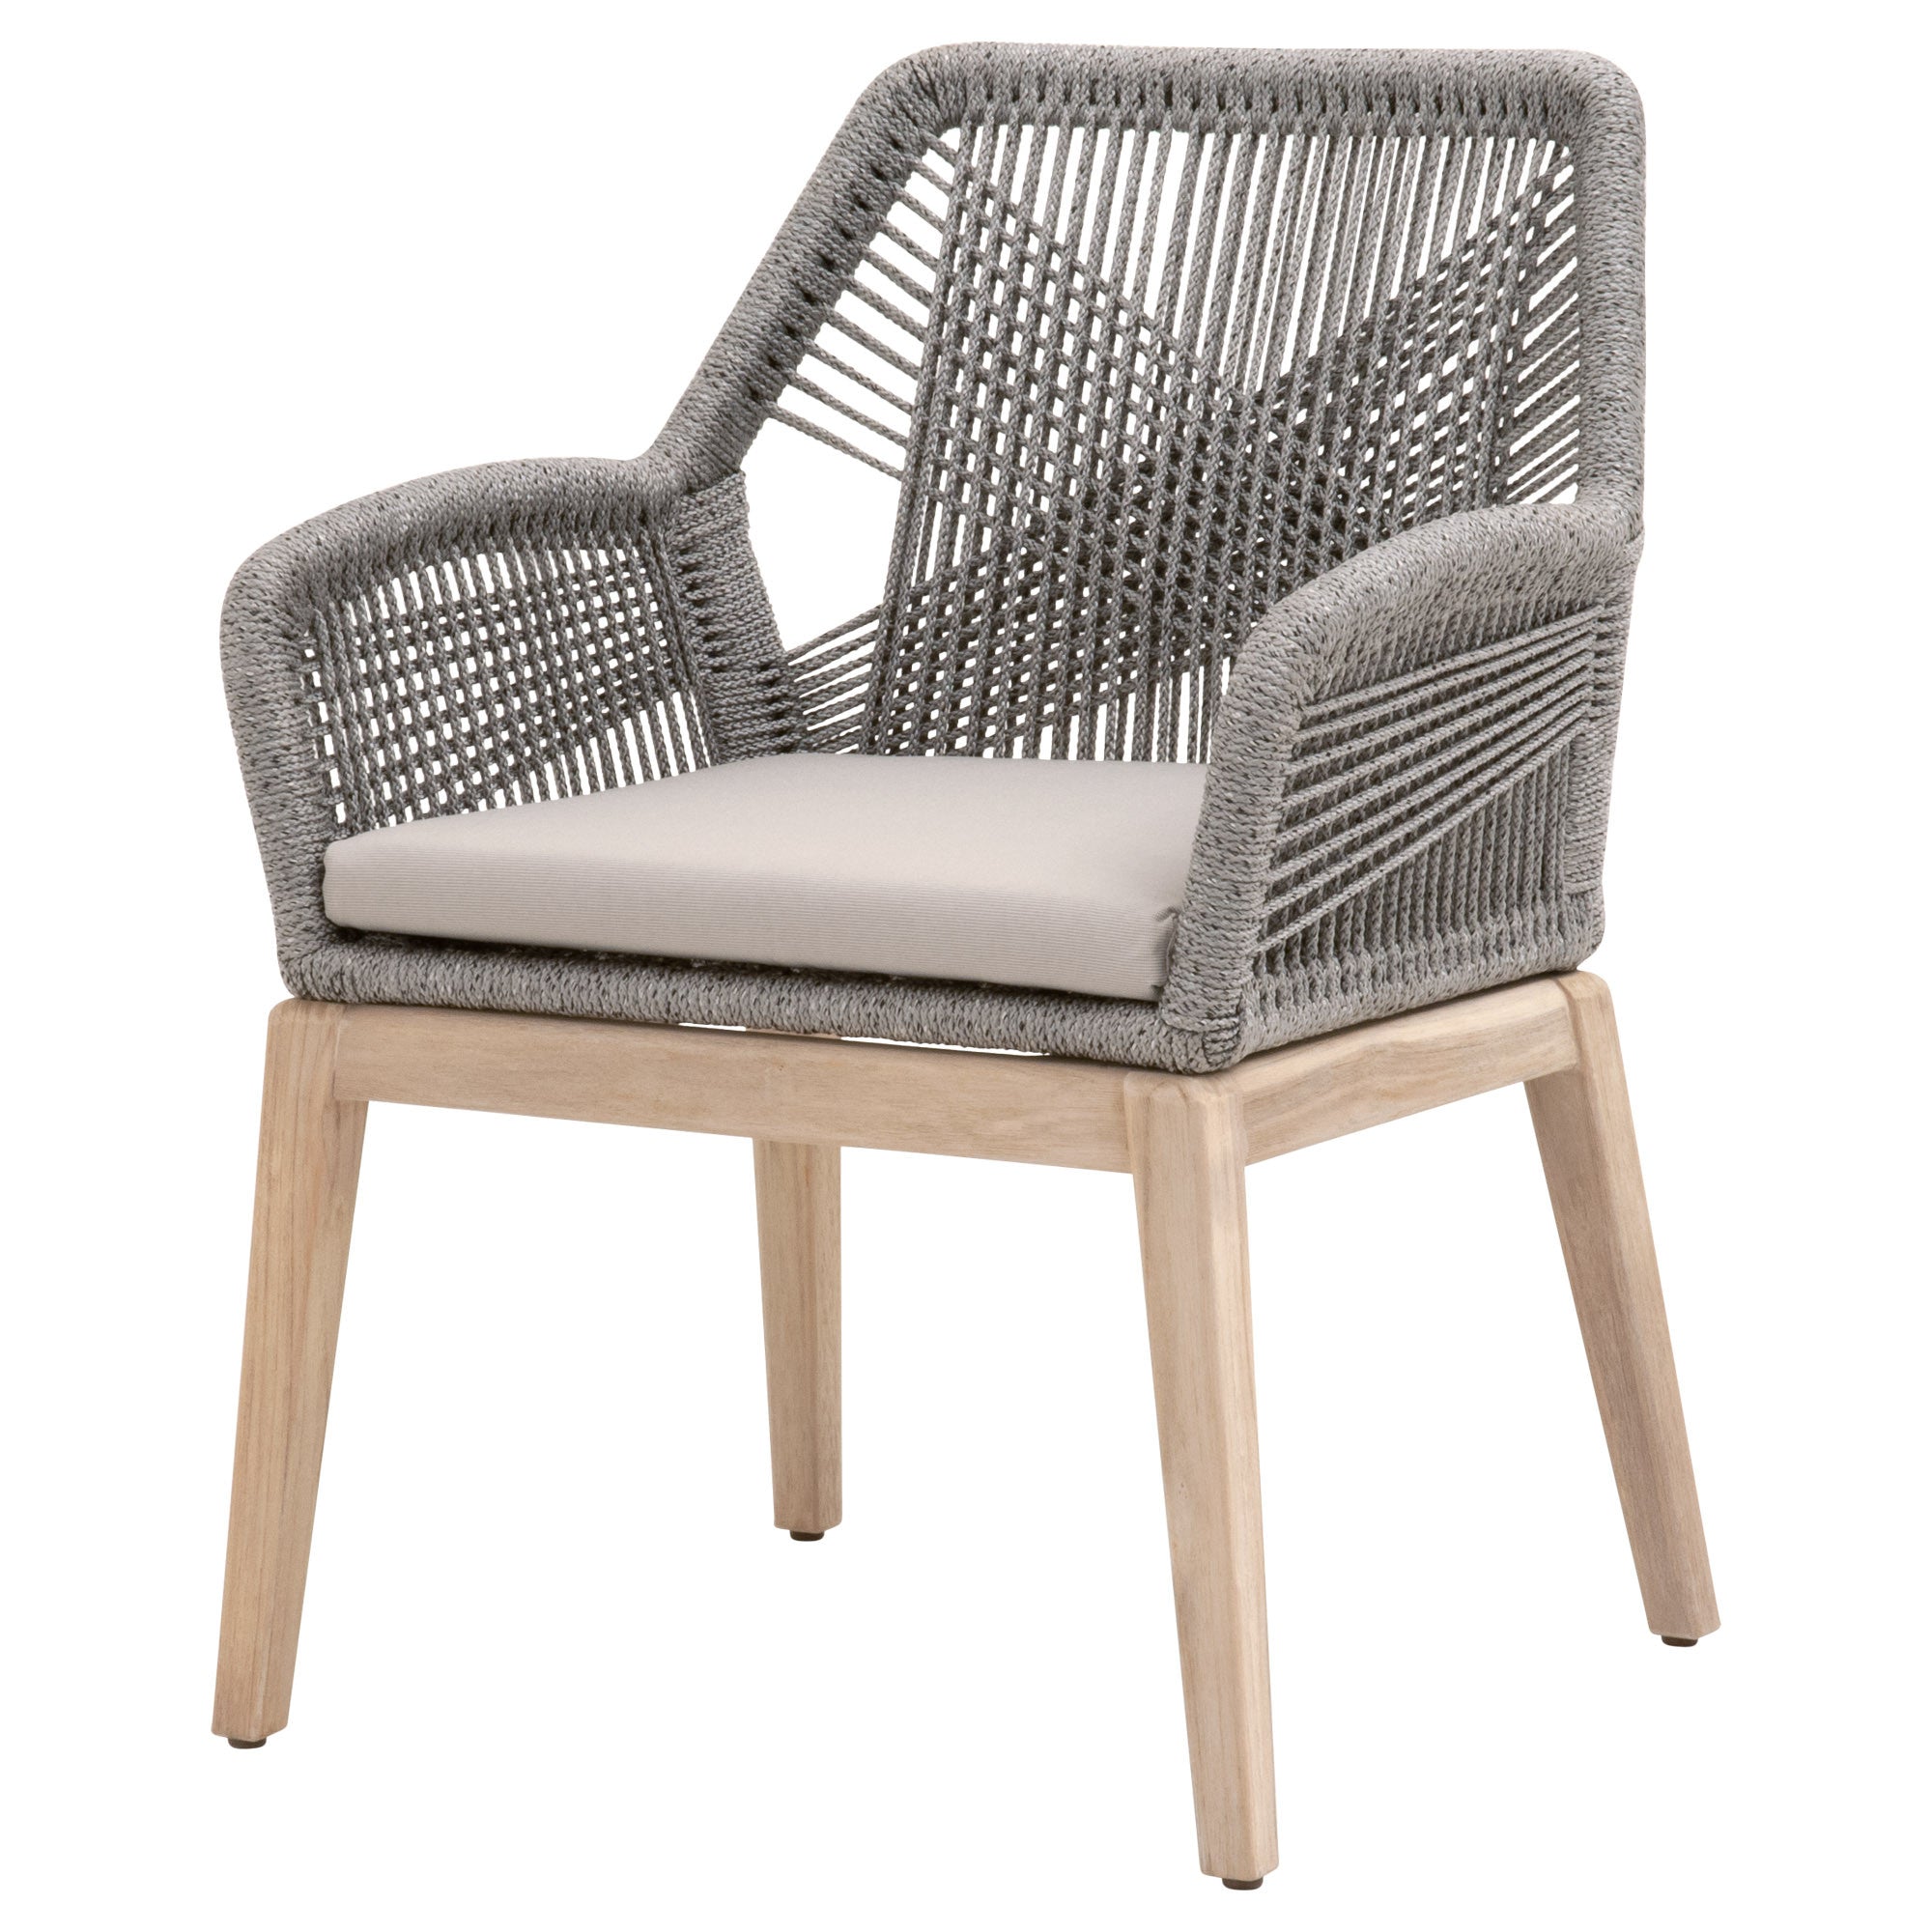 26" Set Of Two Platinum And Natural Solid Wood Dining Chair With Gray Cushion - Tuesday Morning-Outdoor Chairs